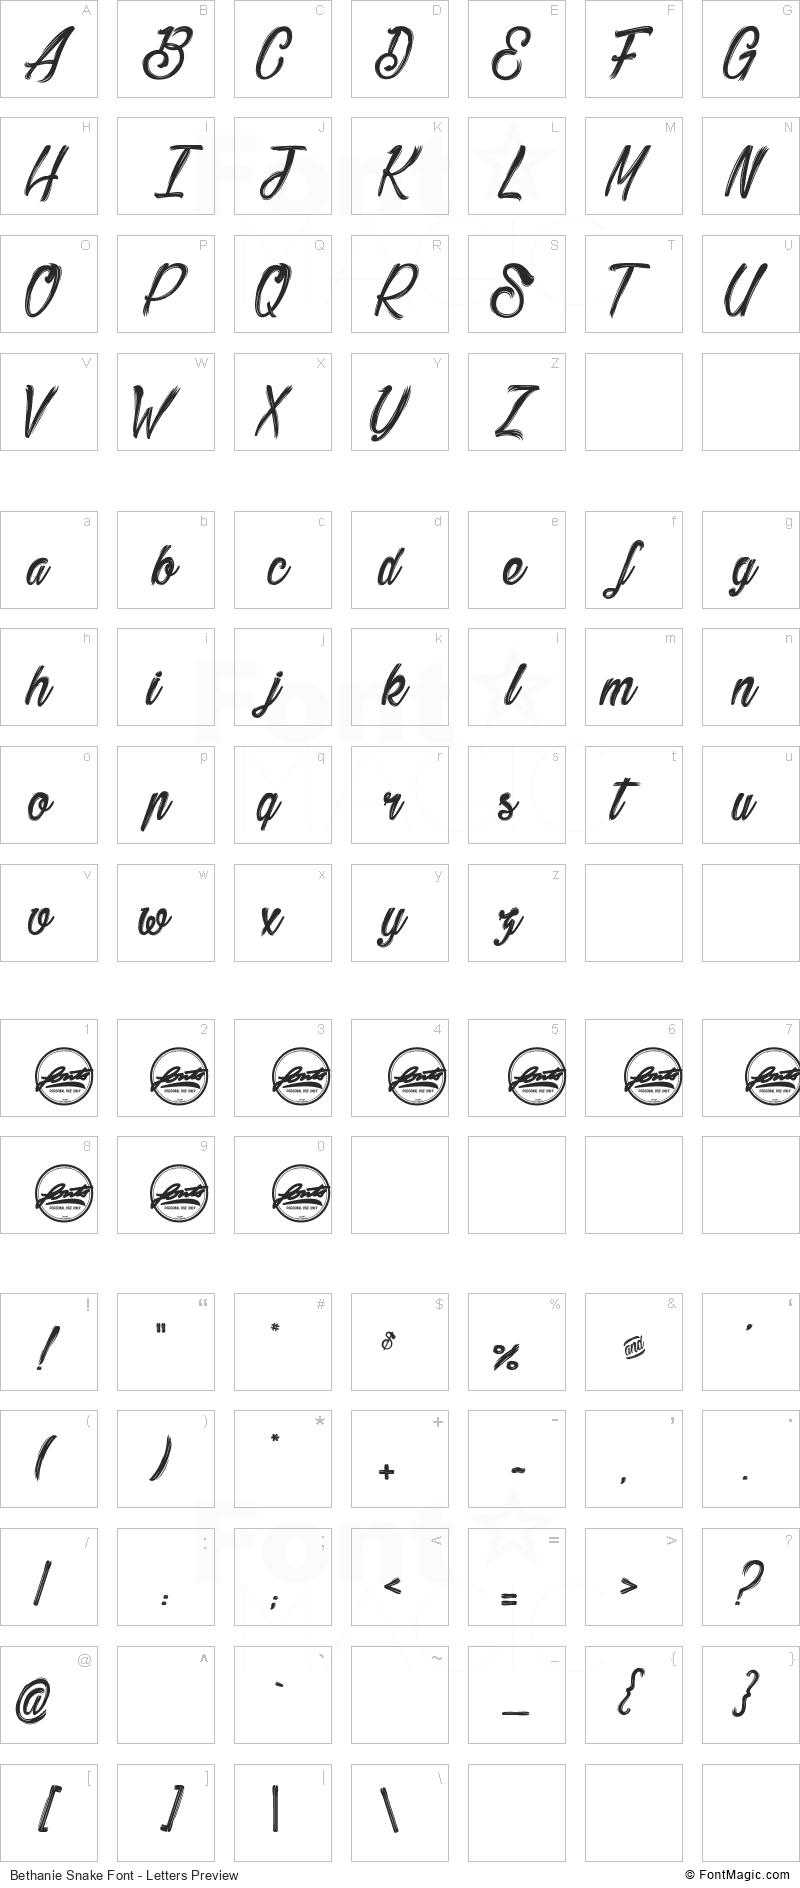 Bethanie Snake Font - All Latters Preview Chart